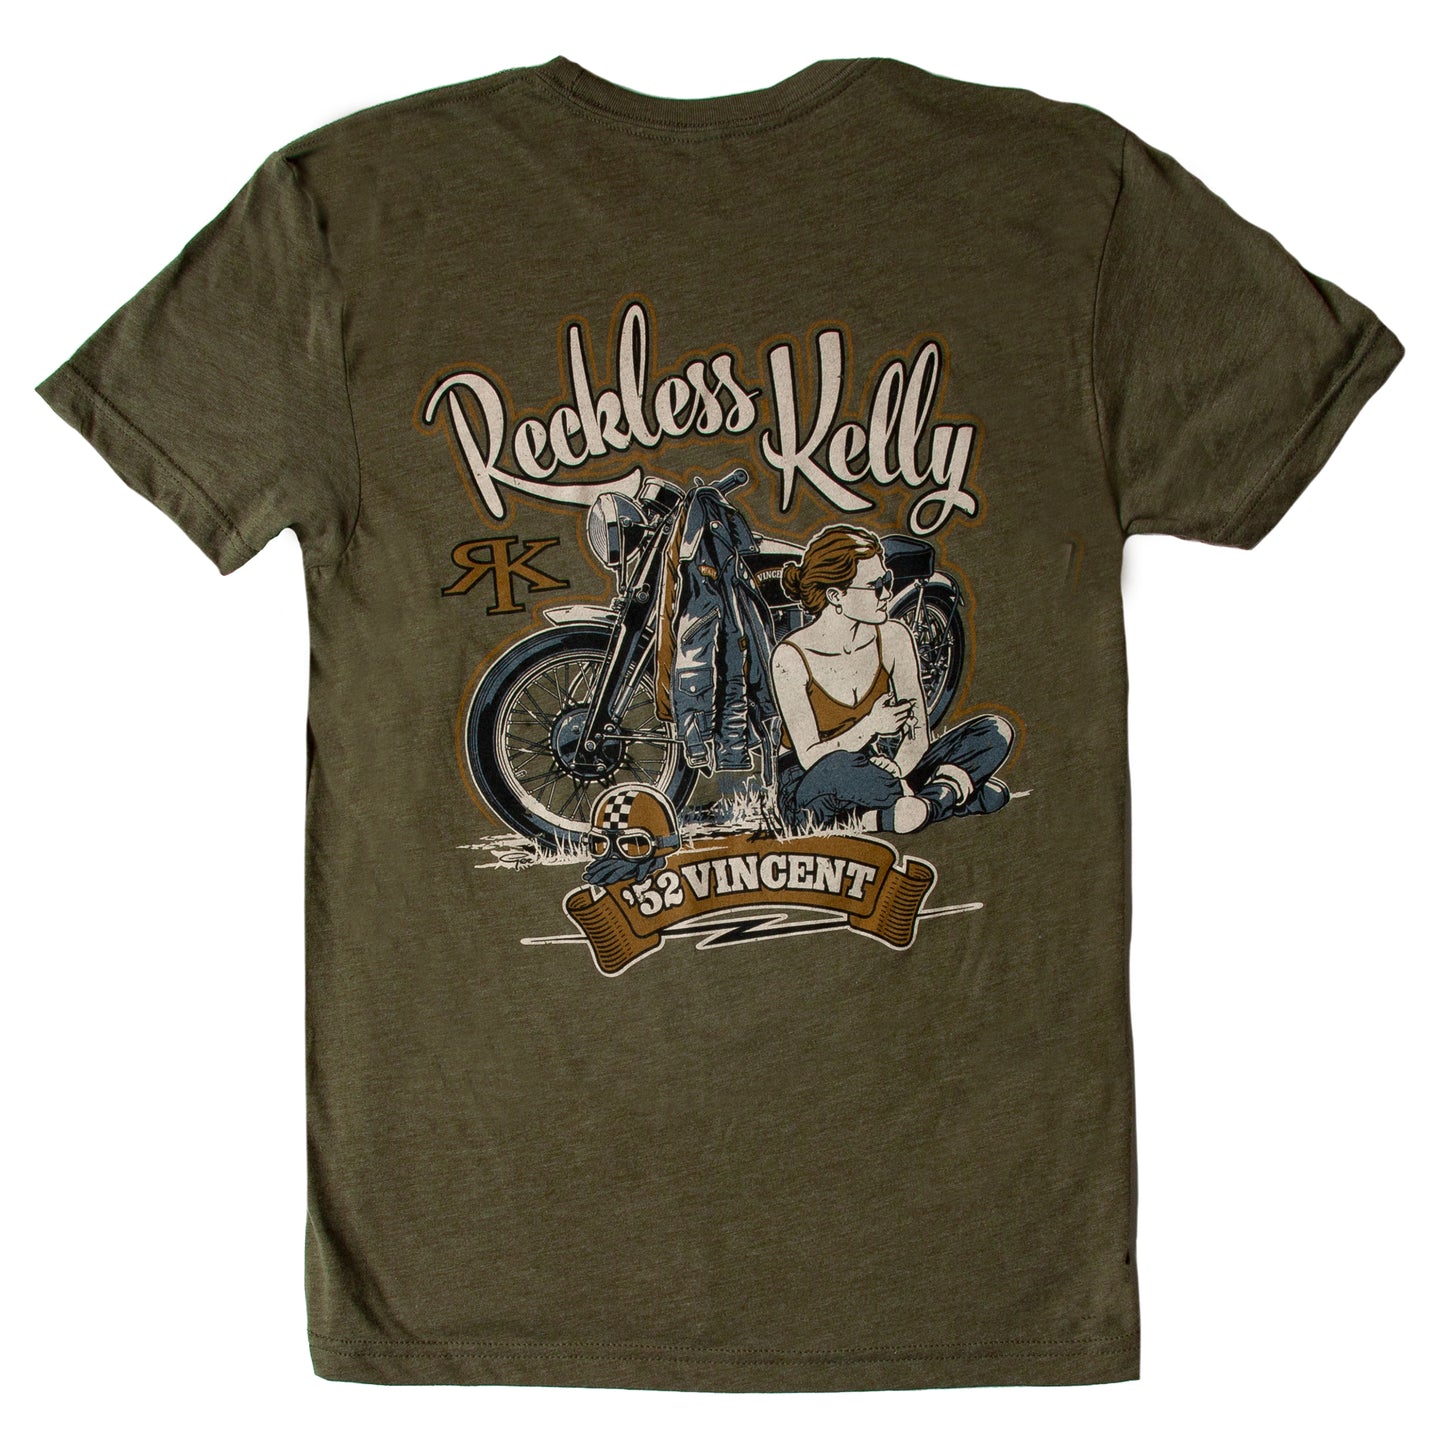 52 Vincent Military Green Tee